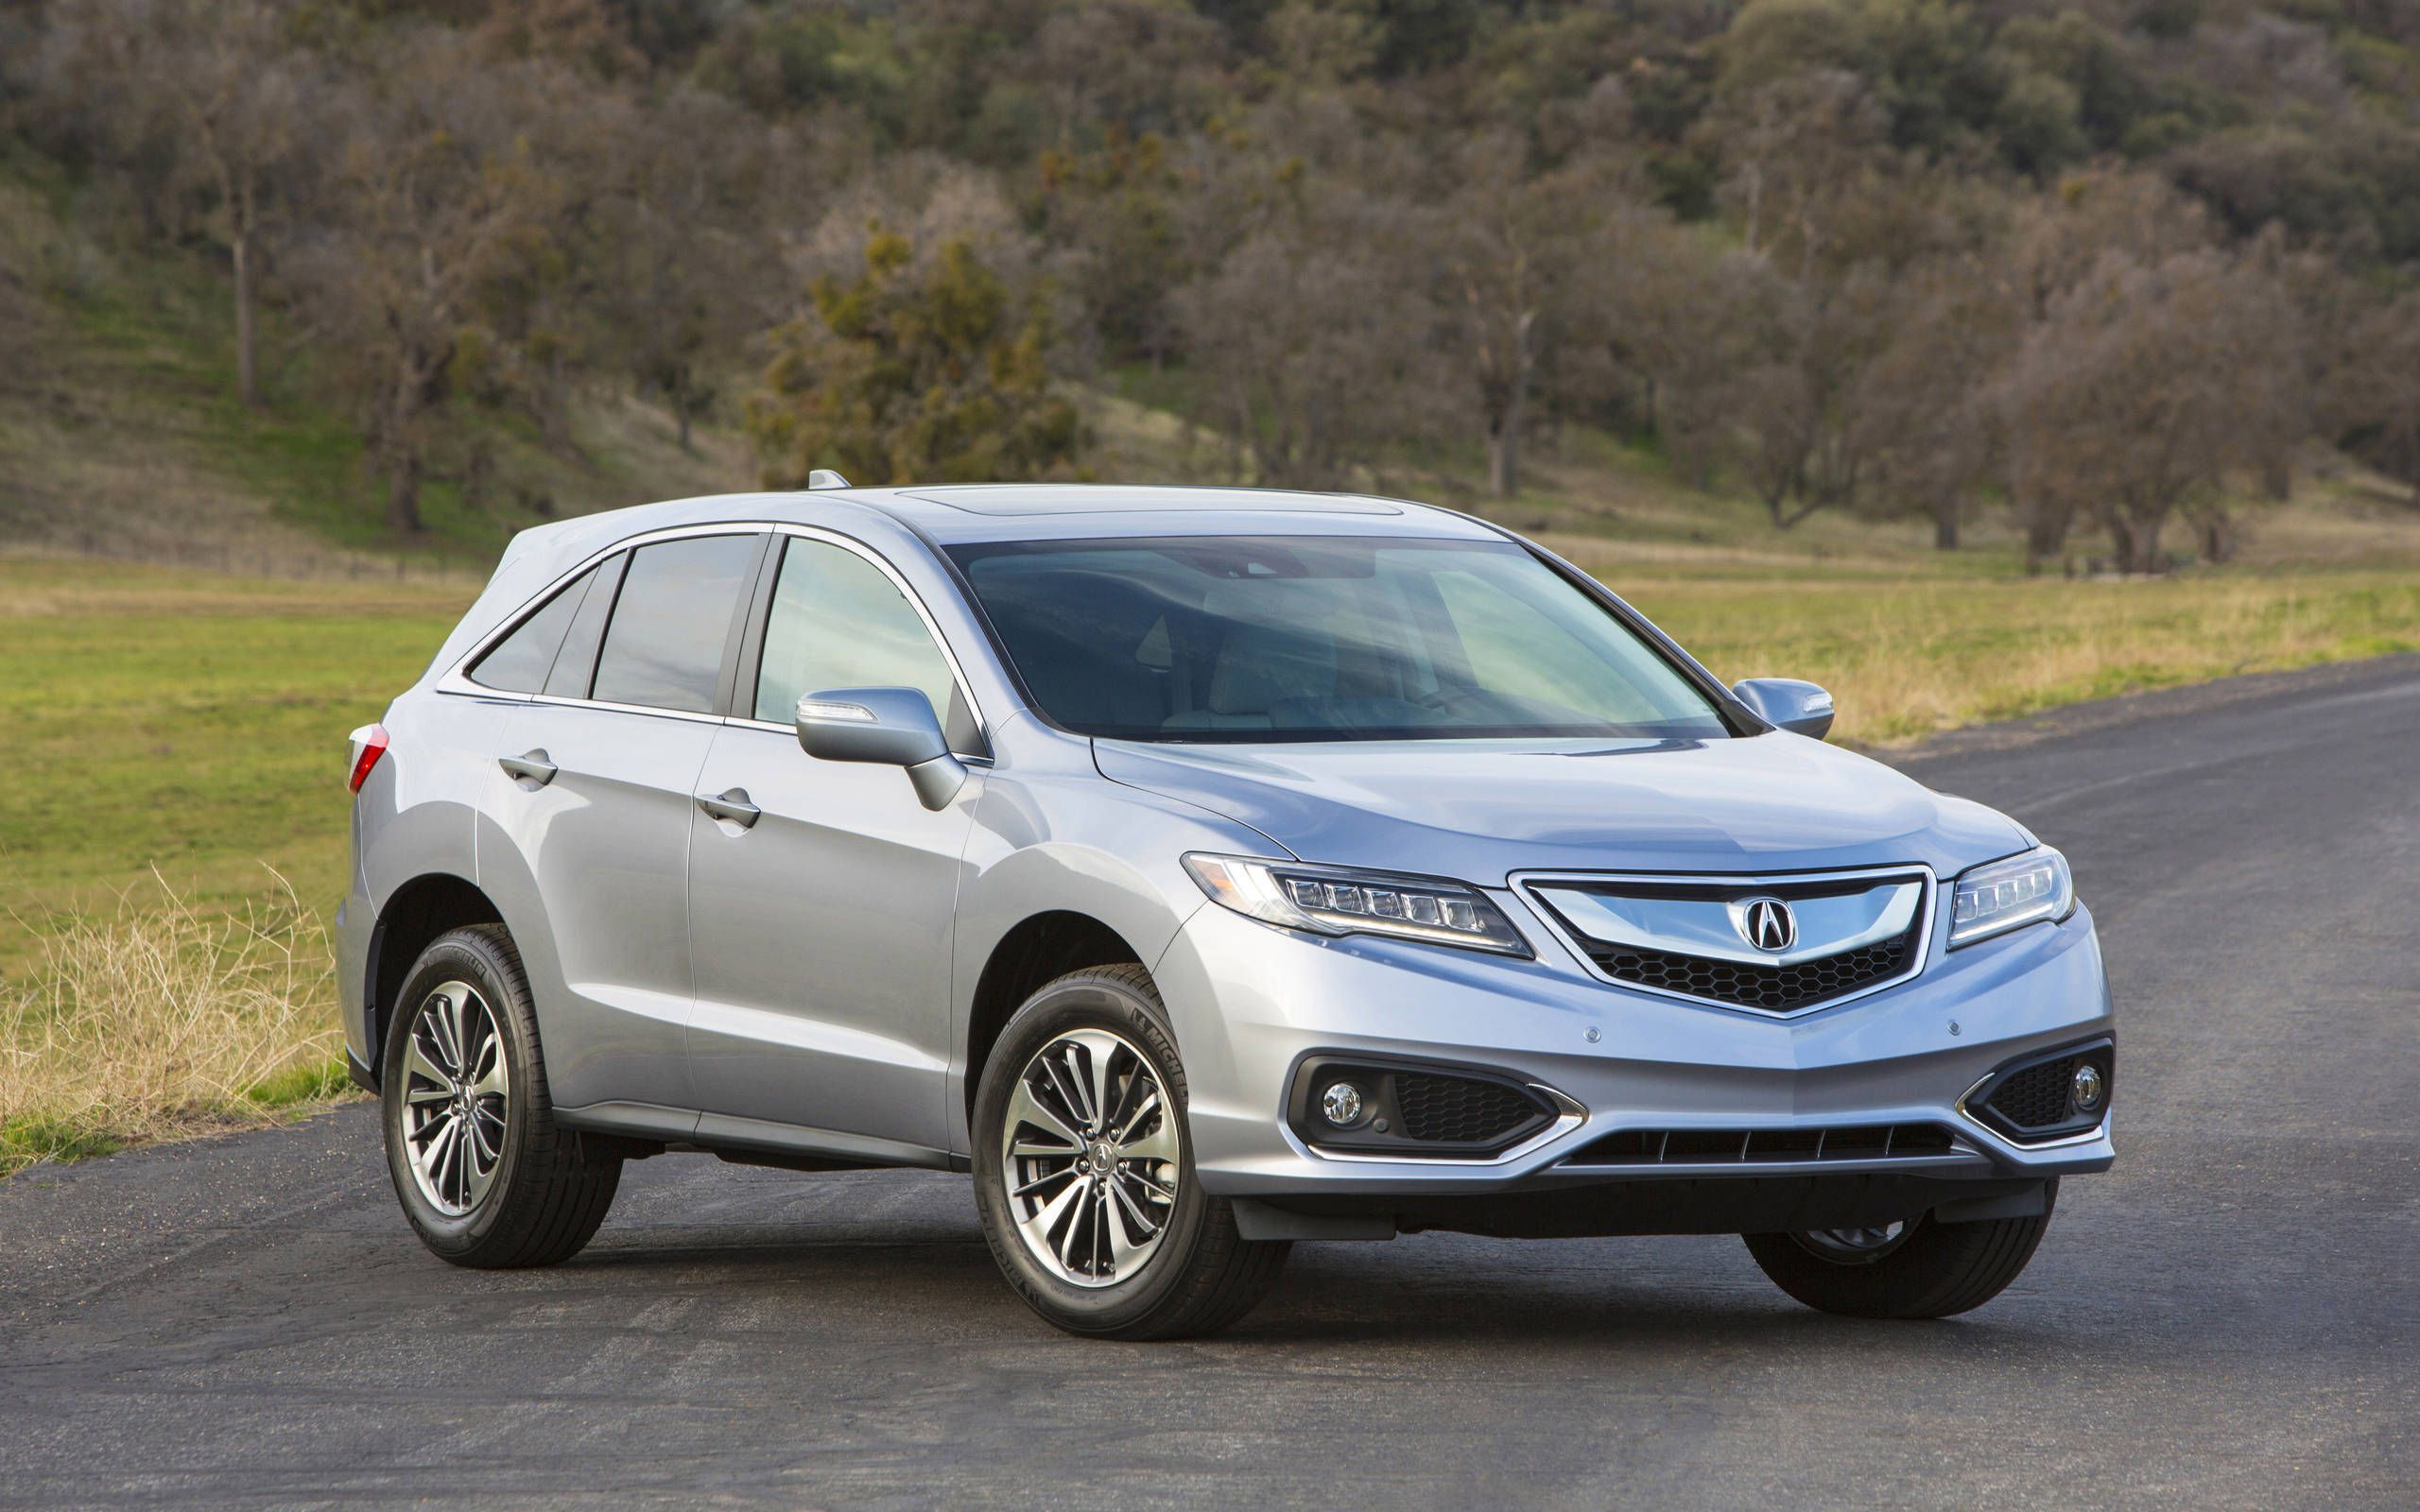 2016 Acura RDX drive review: Most improved player?